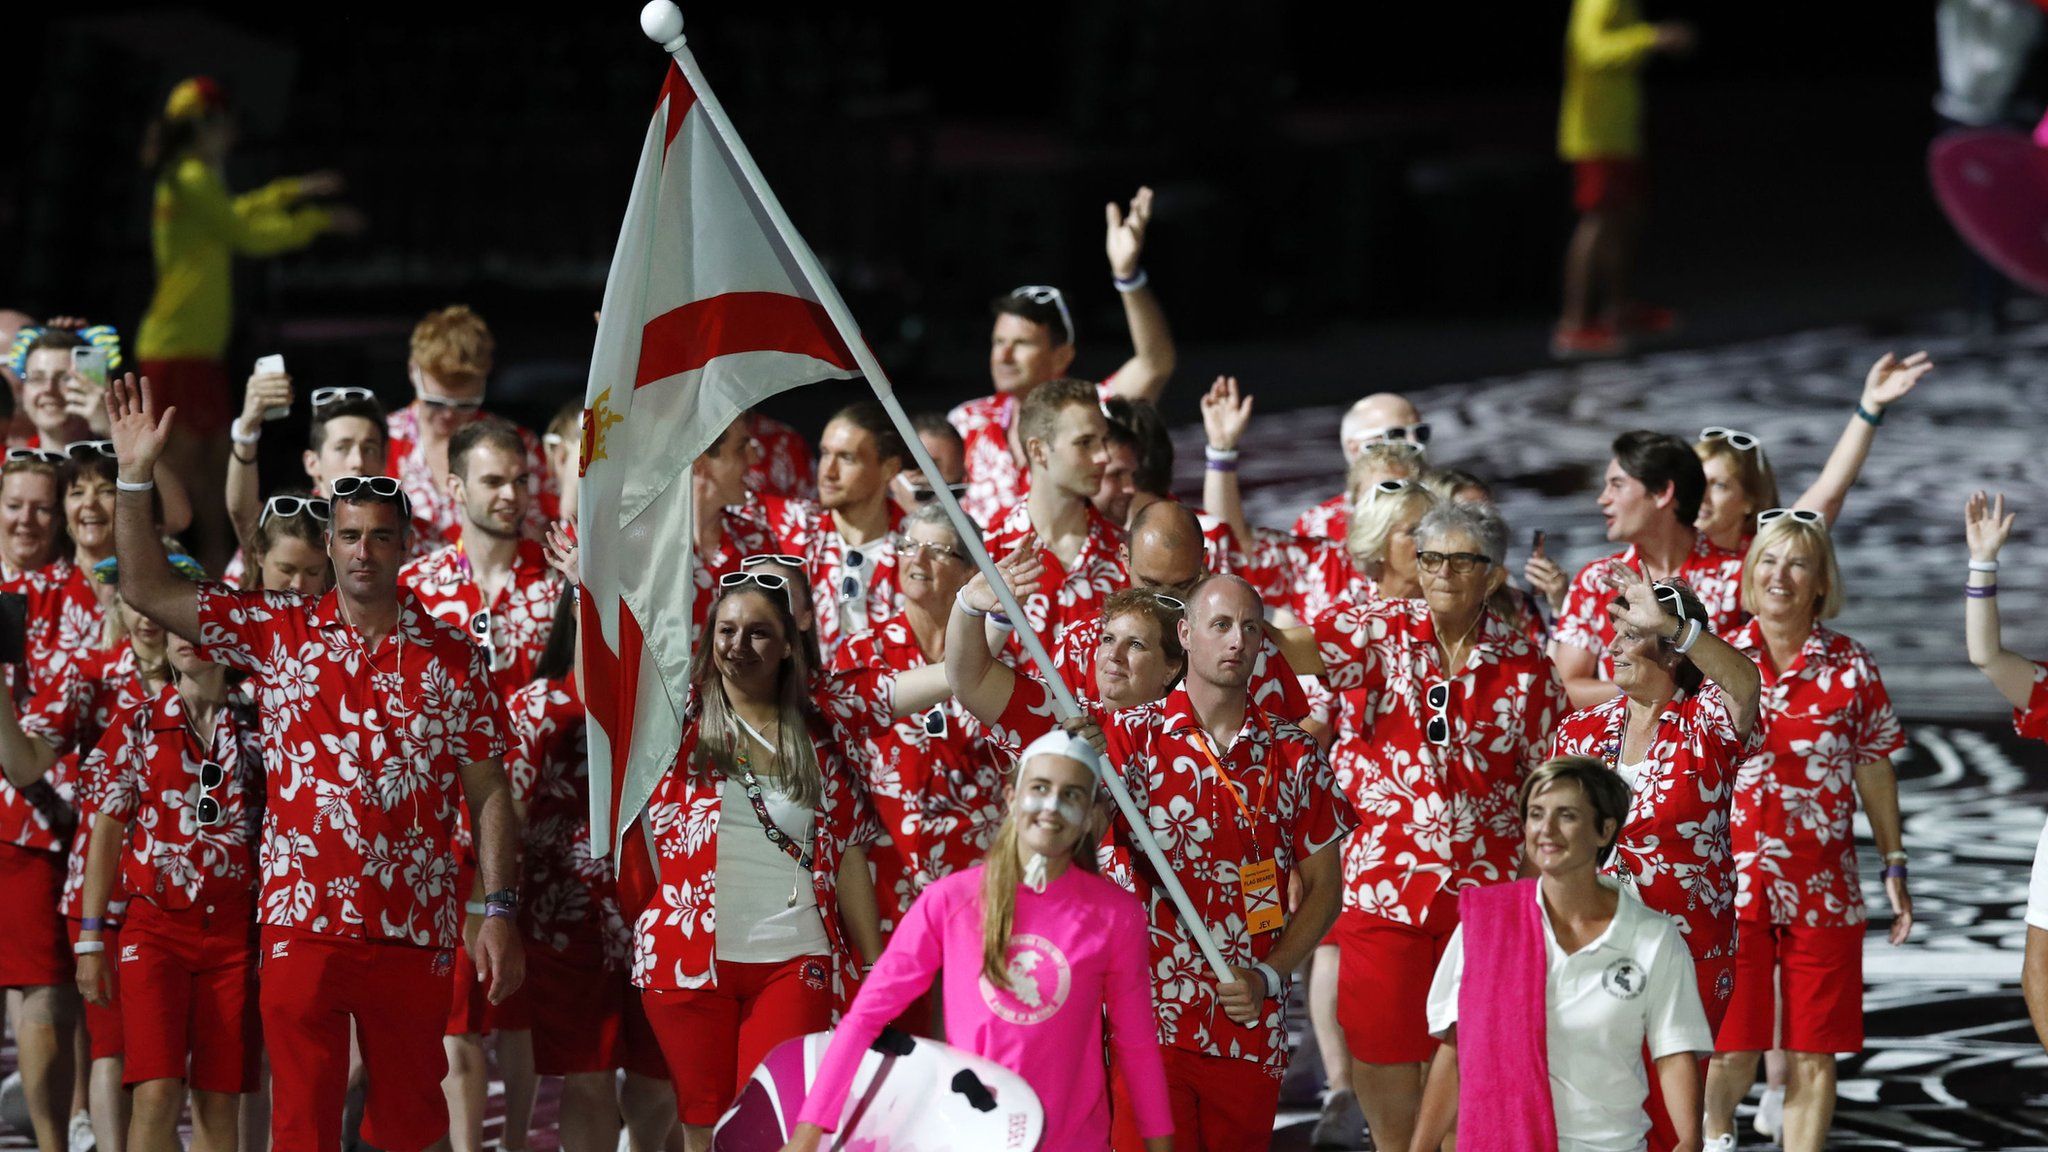 Jersey at the 2018 Commonwealth Games opening ceremony